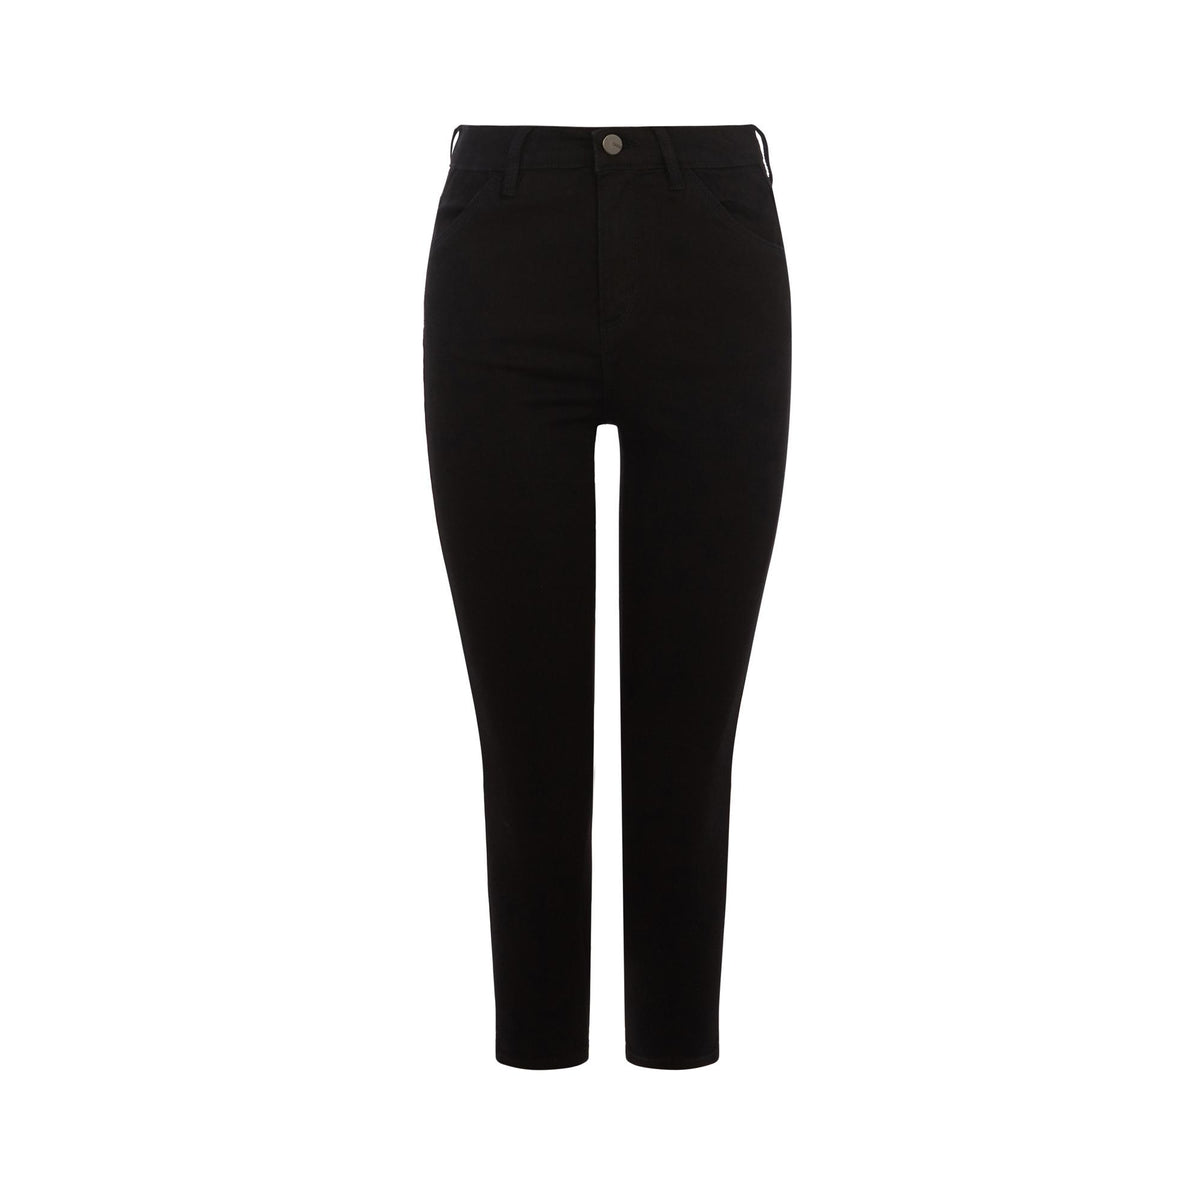 Oasis Iconic Grace Capri Cropped Skinny Jeans